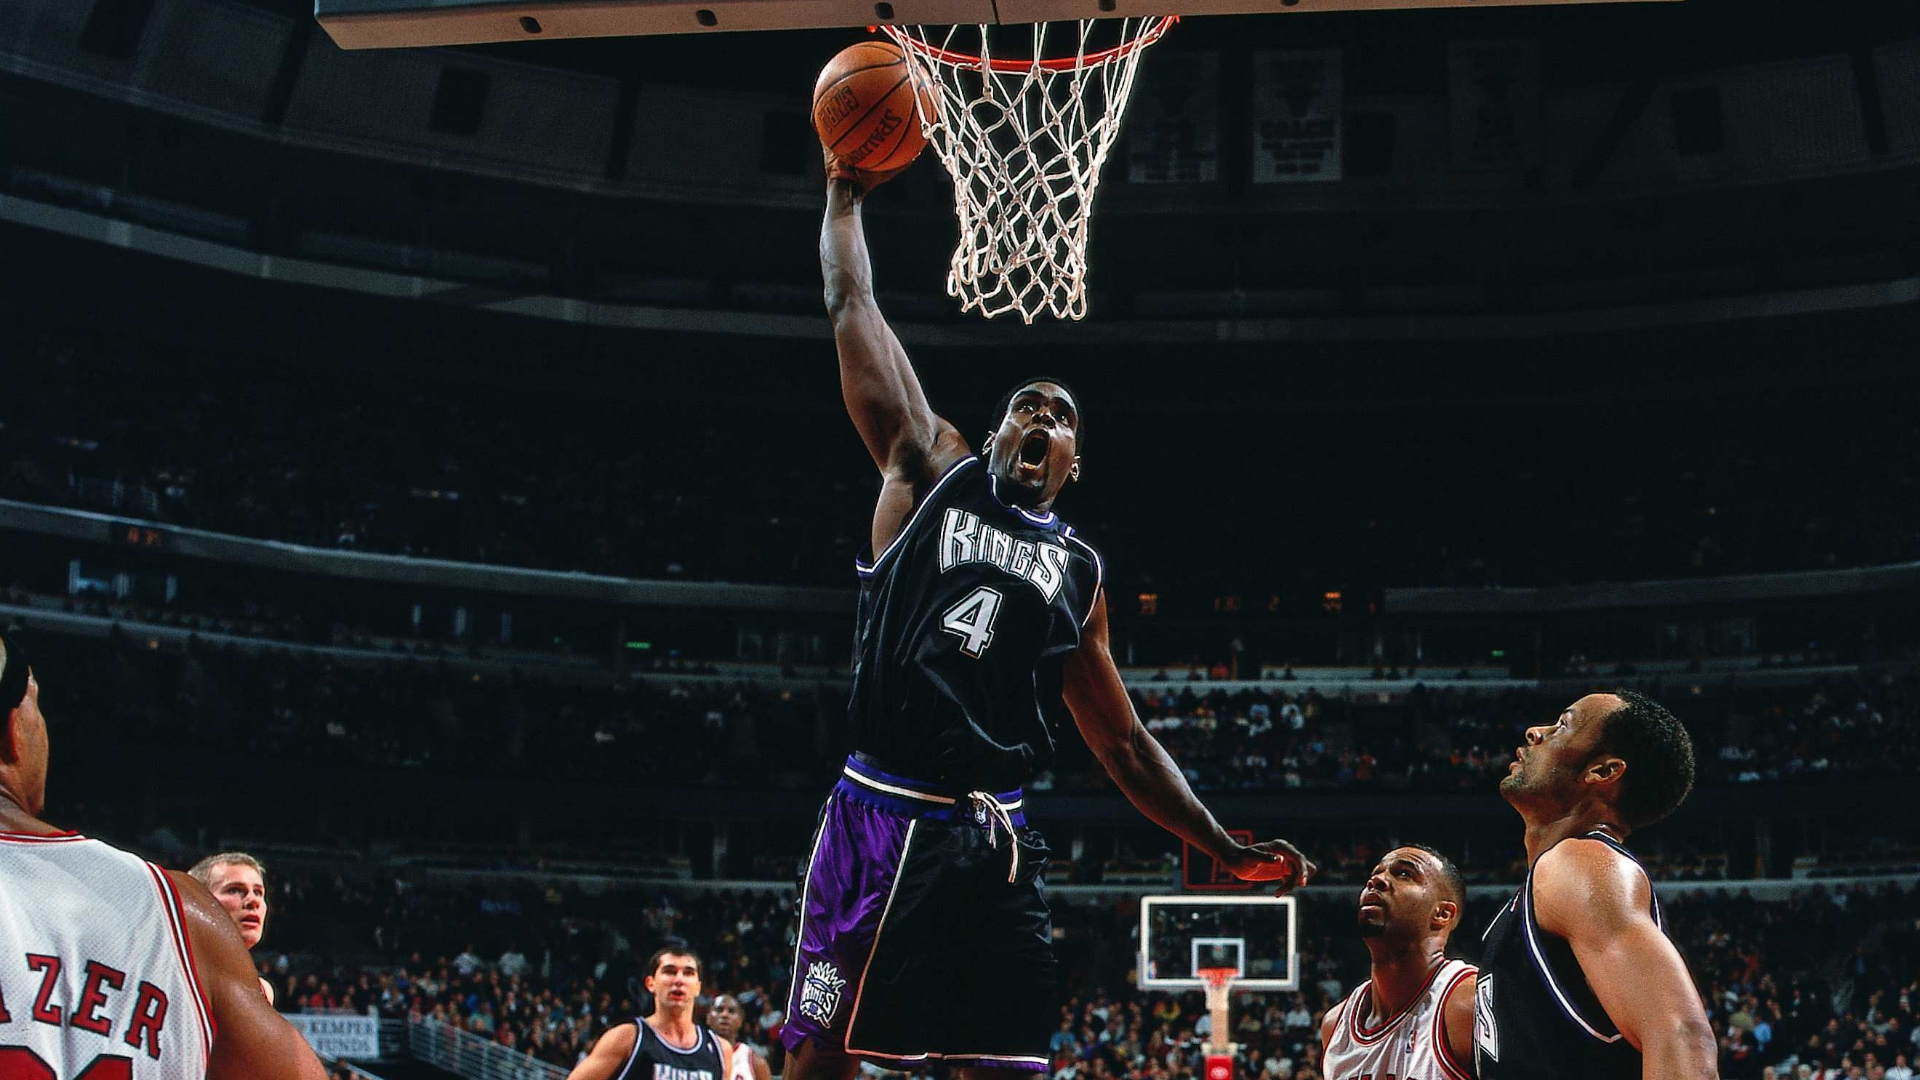 Chris Webber and Rick Adelman entering the Hall of Fame together is a reminder of the Kings' special run. NBA.com Canada. The official site of